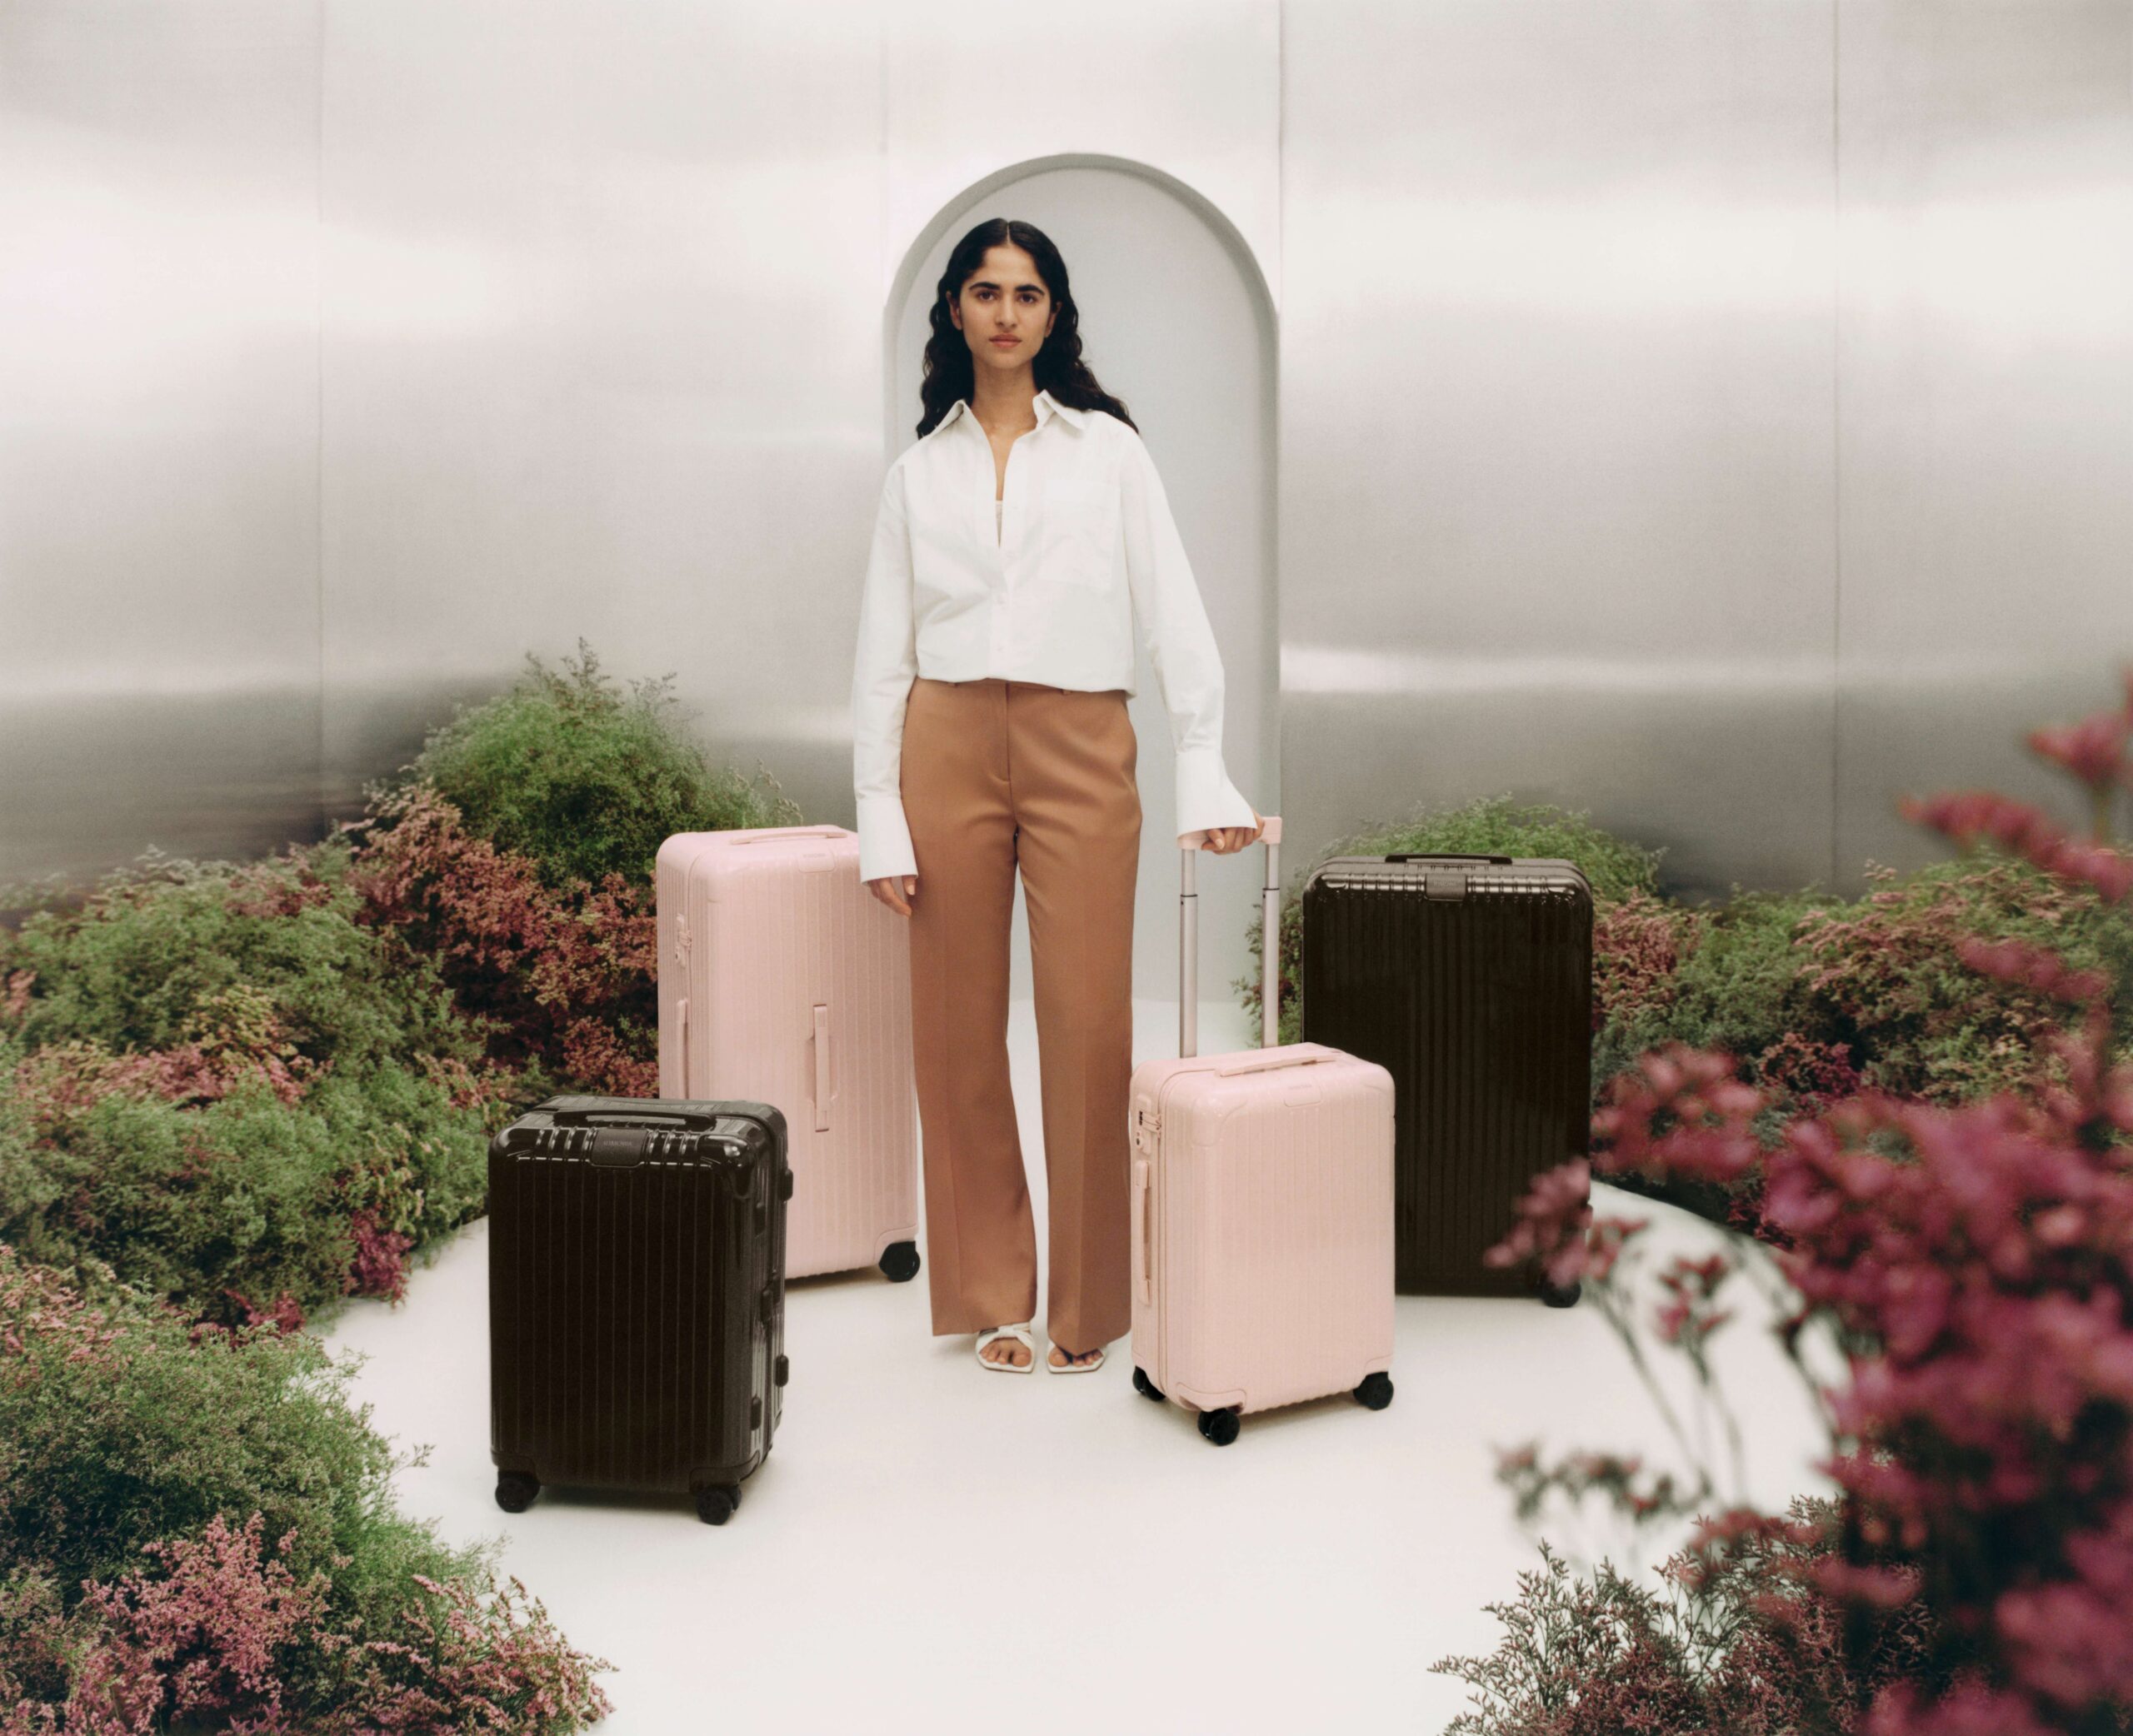 RIMOWA's new seasonal hues is an ode to the beauty of contrasts